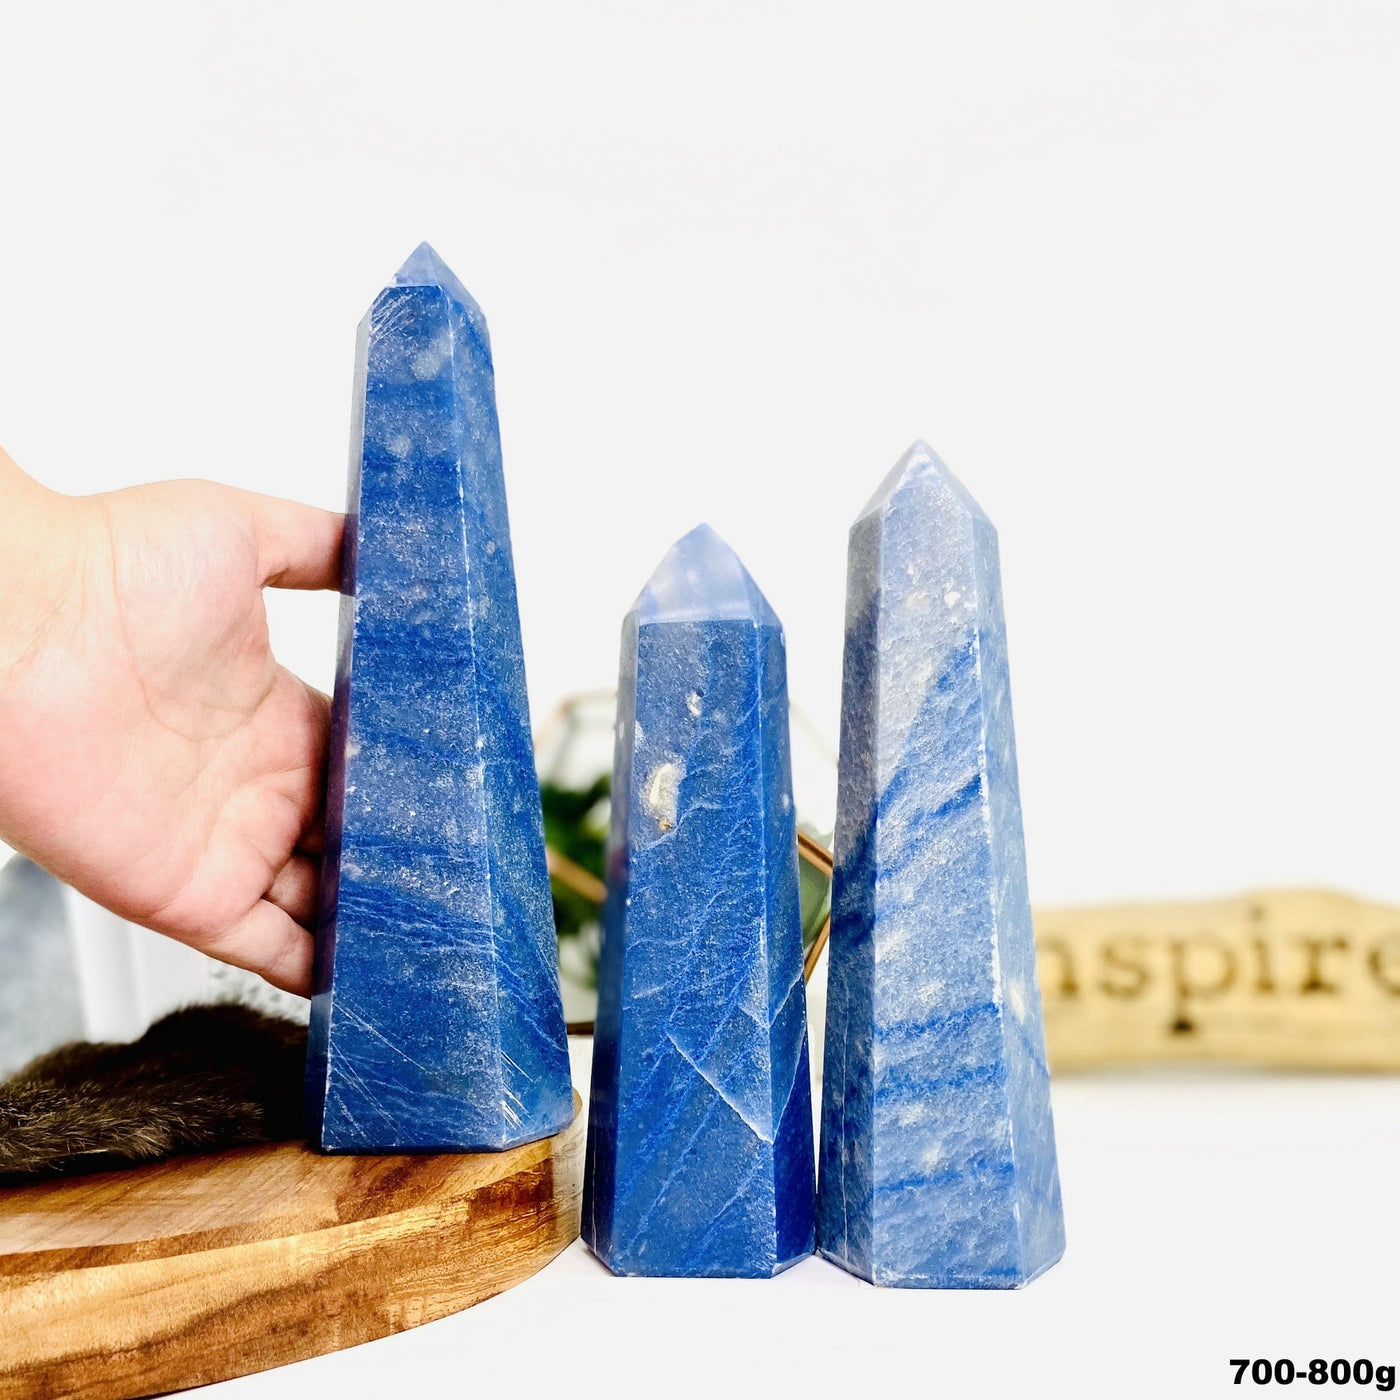 Three Blue Quartz Tower Points weighing at 700-800g in a variety of sizes